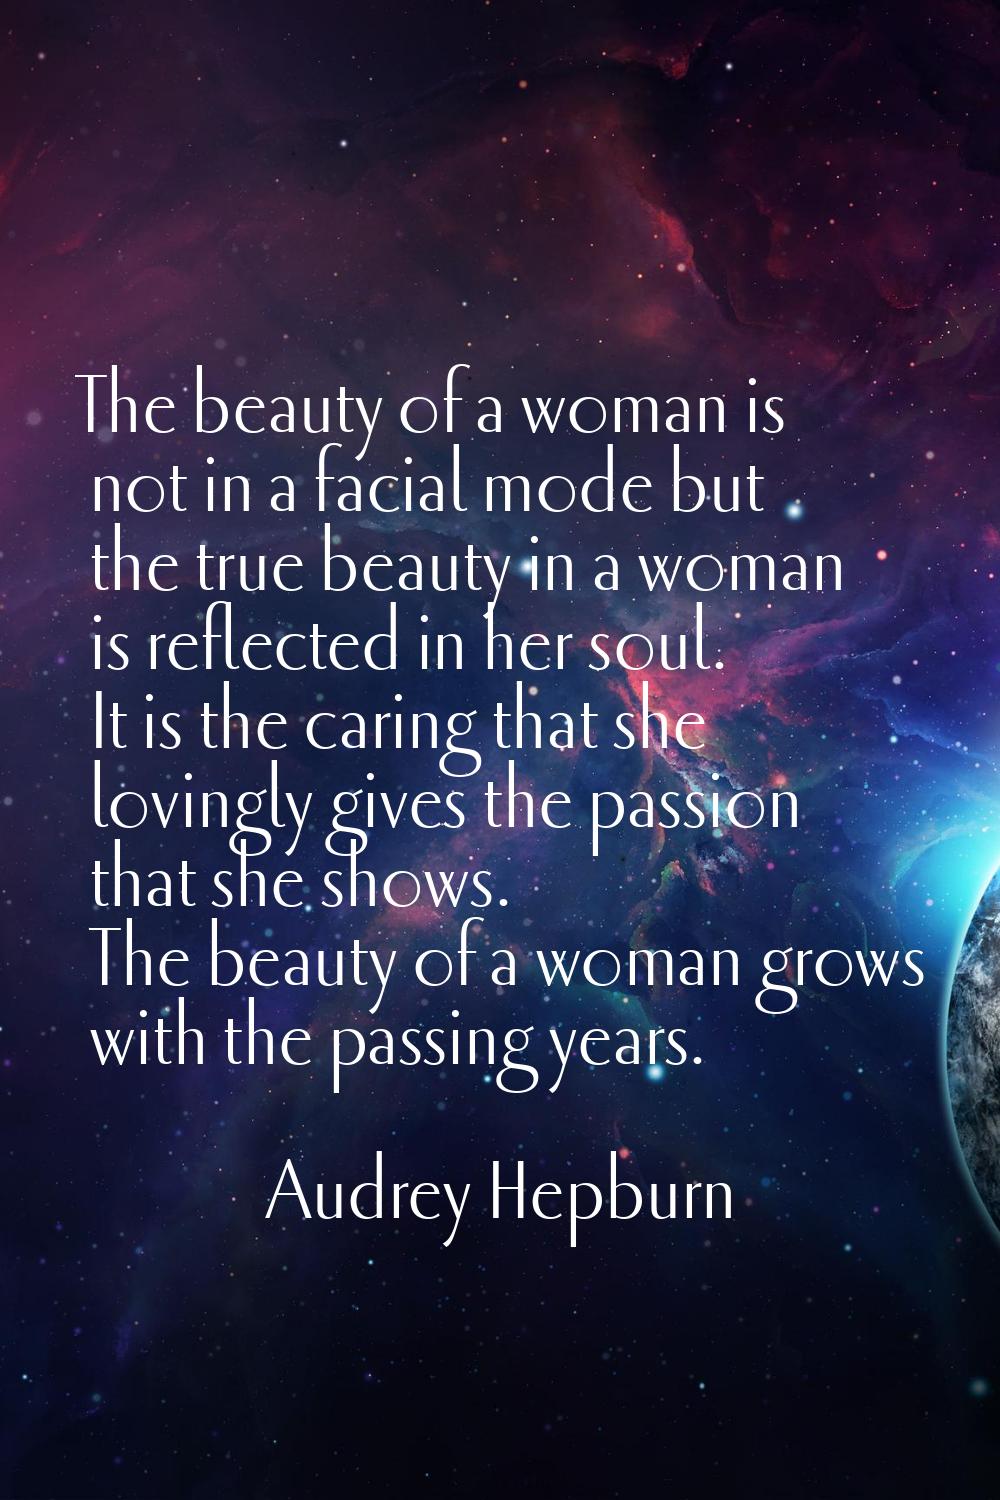 The beauty of a woman is not in a facial mode but the true beauty in a woman is reflected in her so